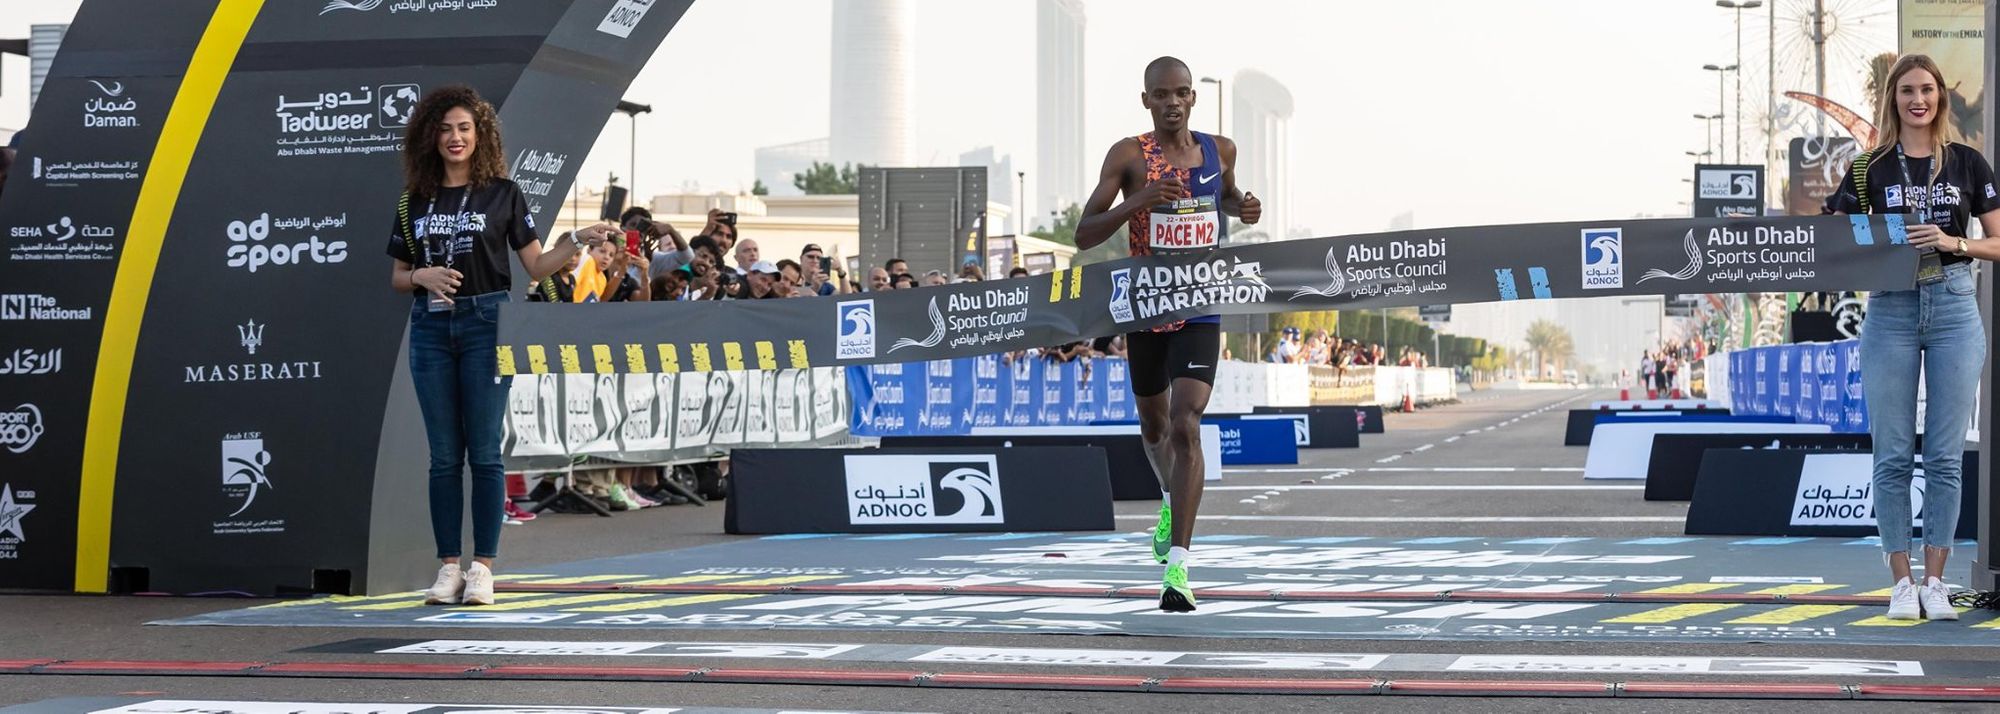 Reuben Kipyego and Vivian Kiplagat will defend their ADNOC Abu Dhabi Marathon titles on Friday (26), but the Kenyan duo will face a strong line-up at the World Athletics Elite Label road race.